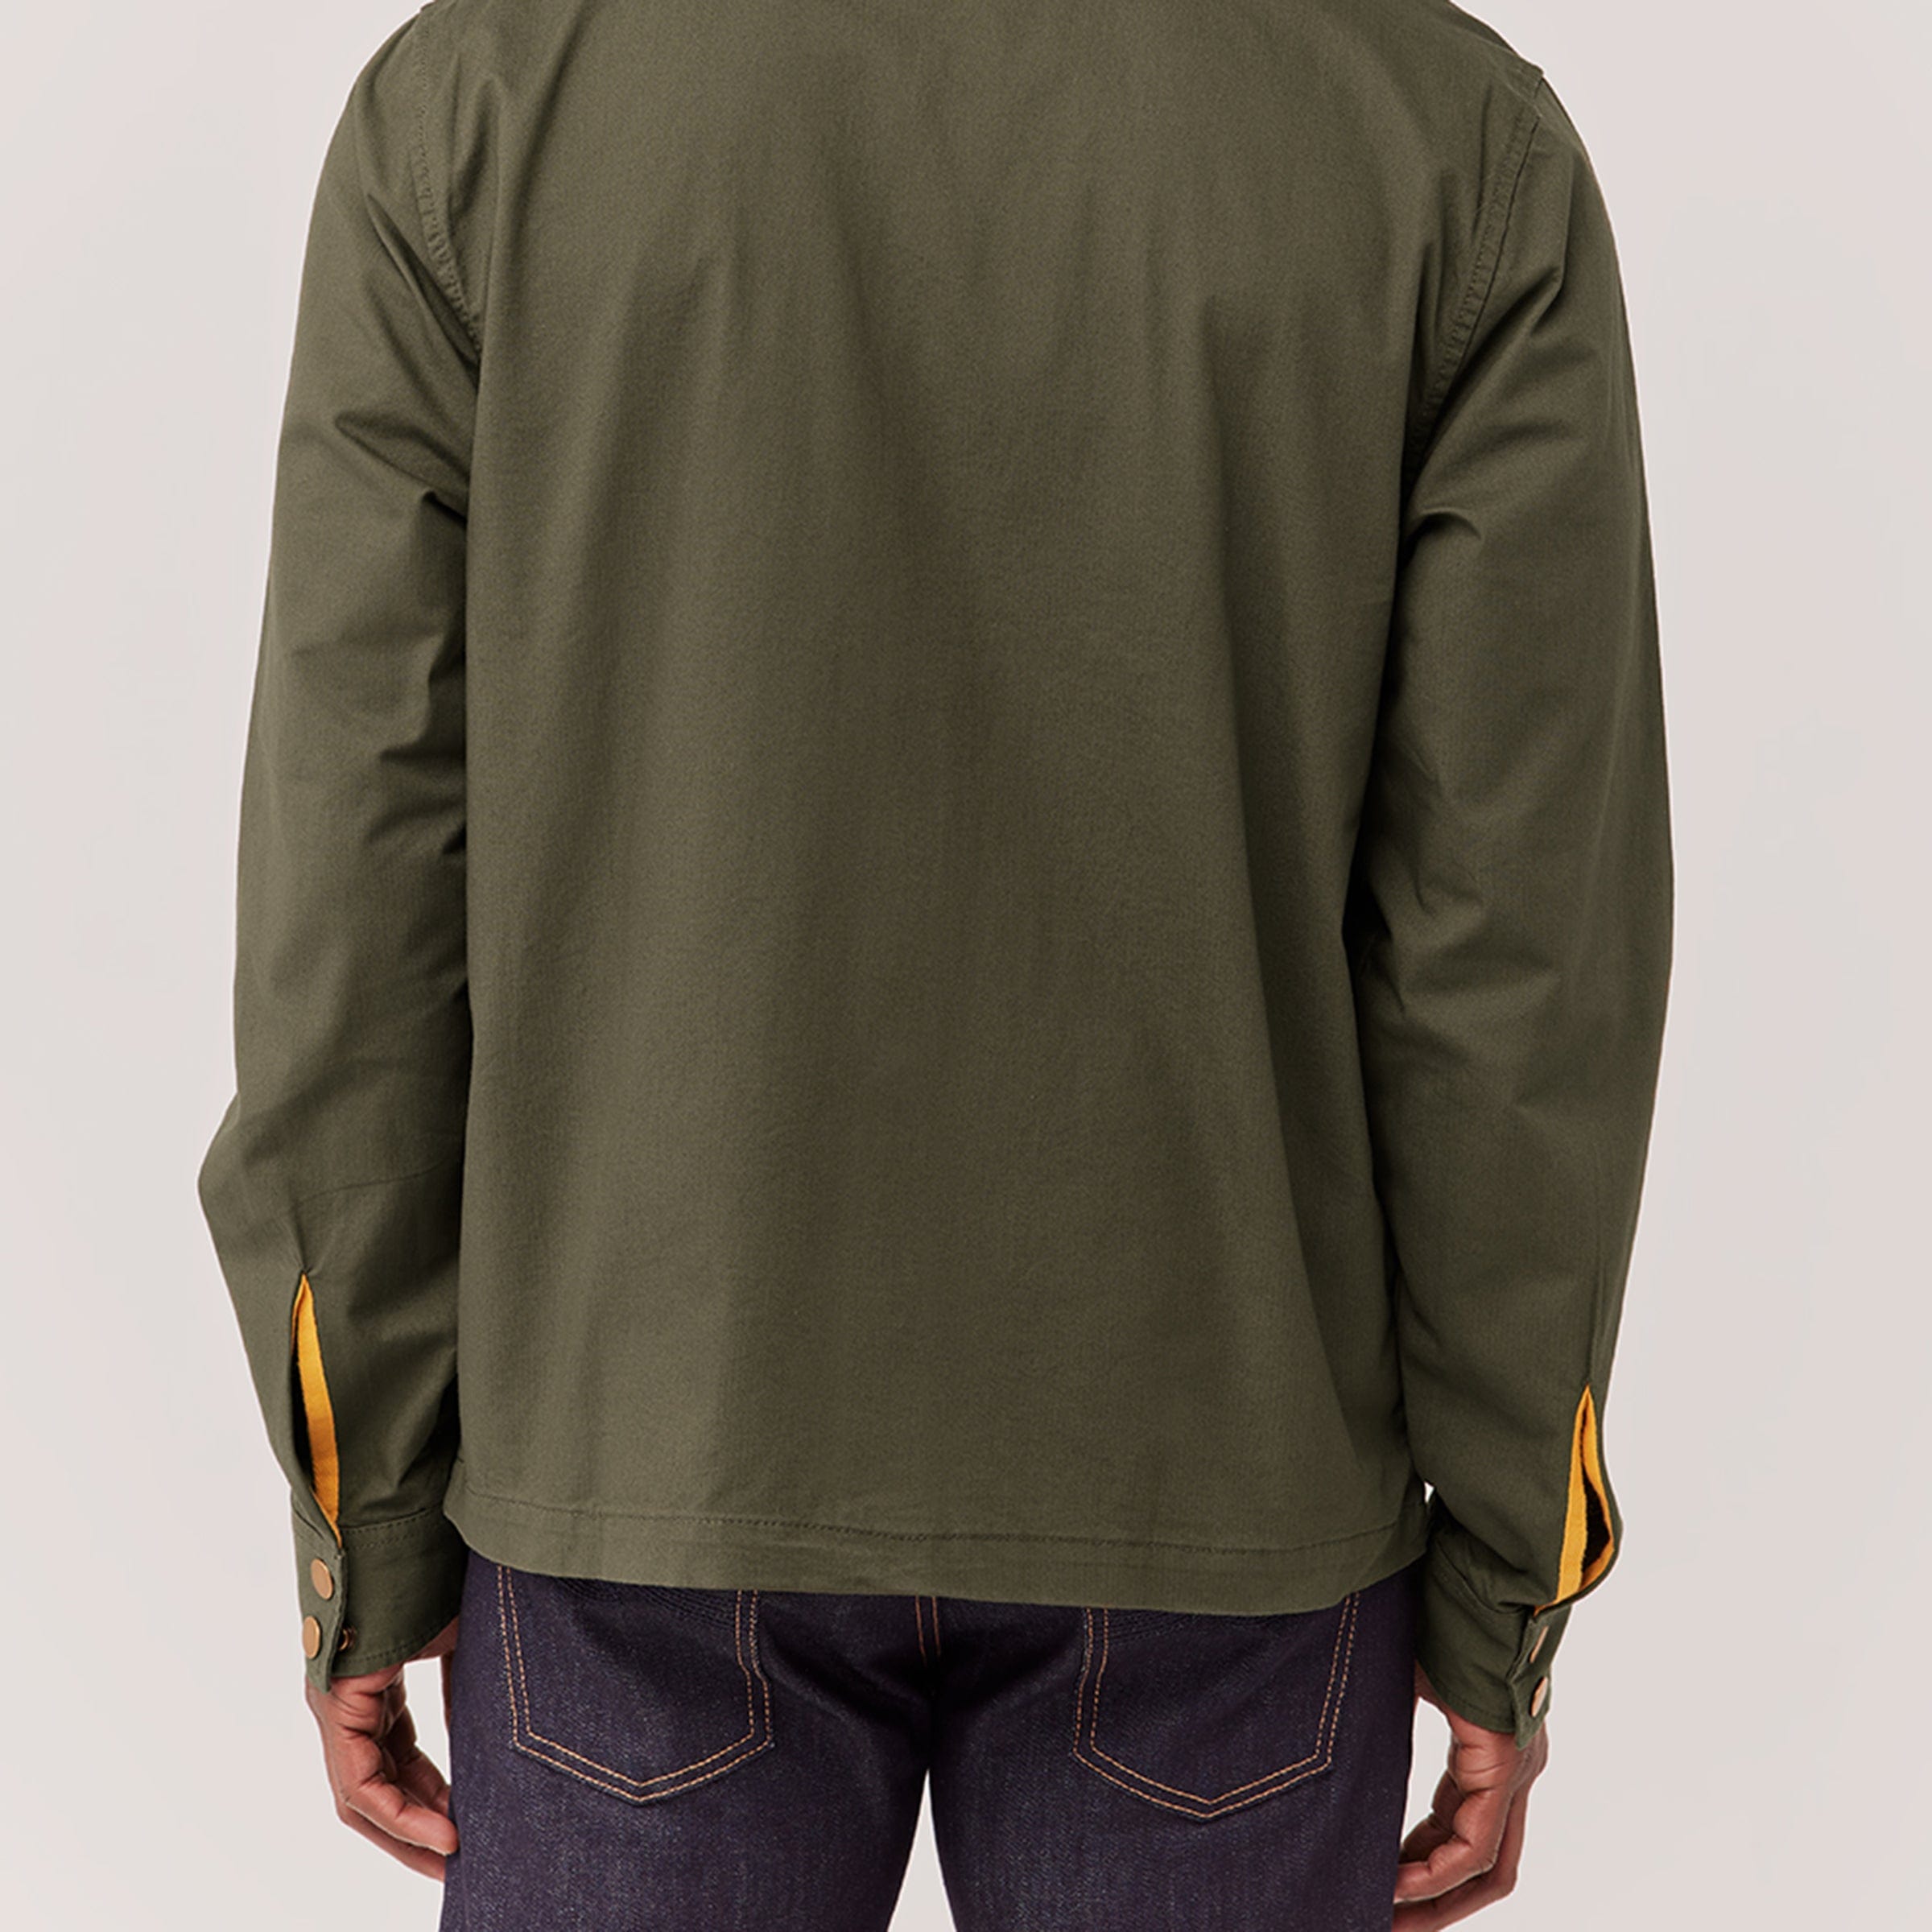 Downtime Pullover Hoodie, Camel – Asher + Rye